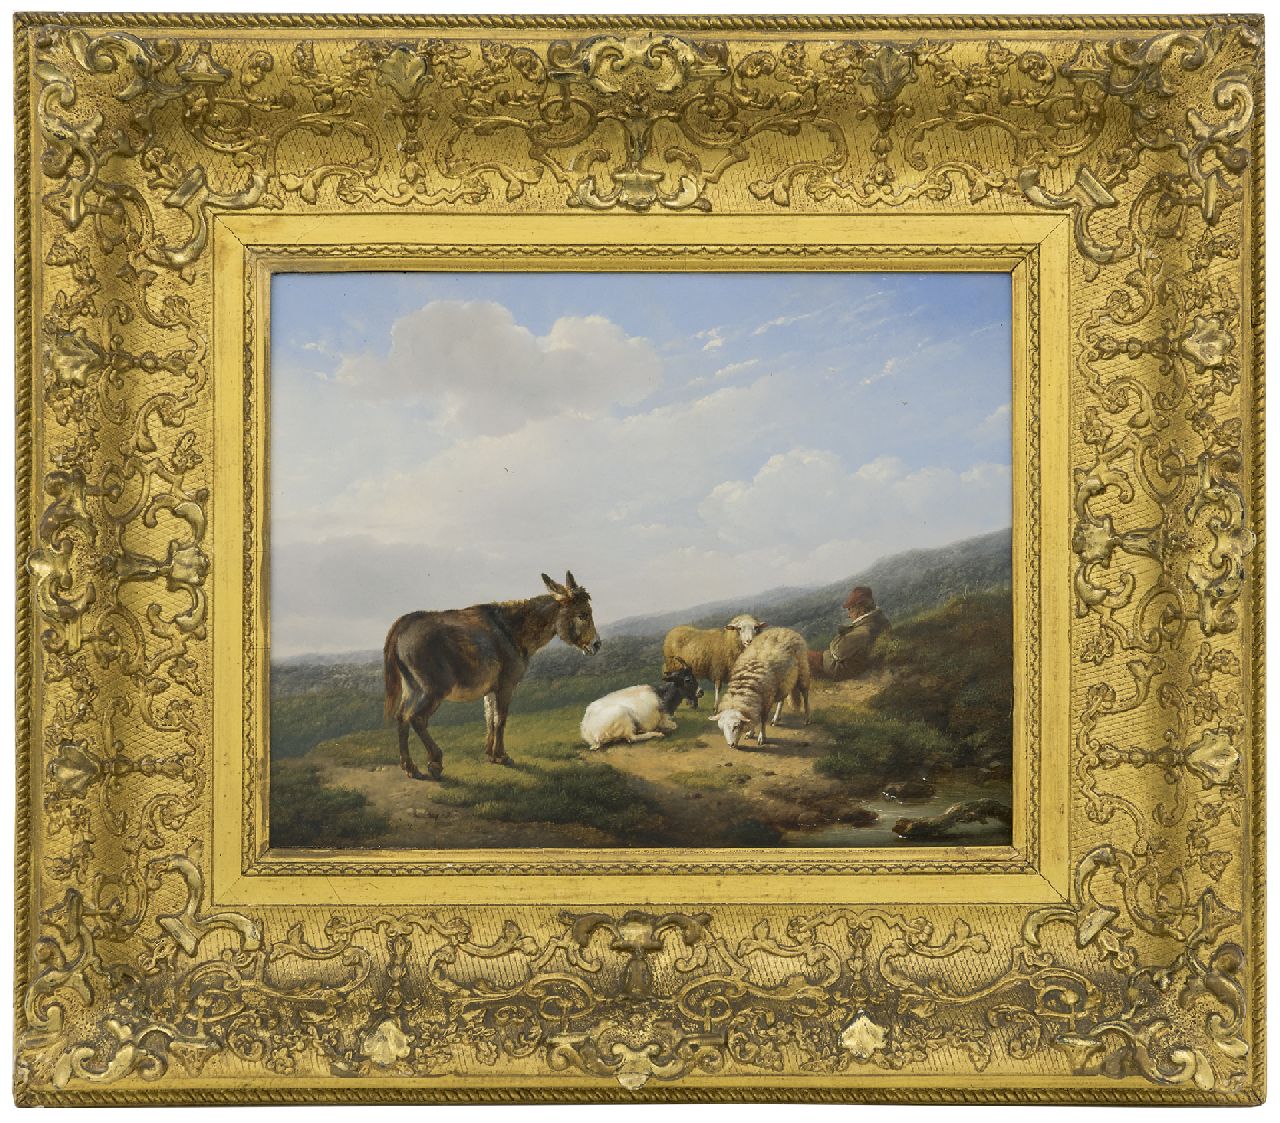 Verboeckhoven E.J.  | Eugène Joseph Verboeckhoven, A shepherd with his sheep, a goat and a donkey, oil on panel 24.7 x 32.2 cm, signed l.l.